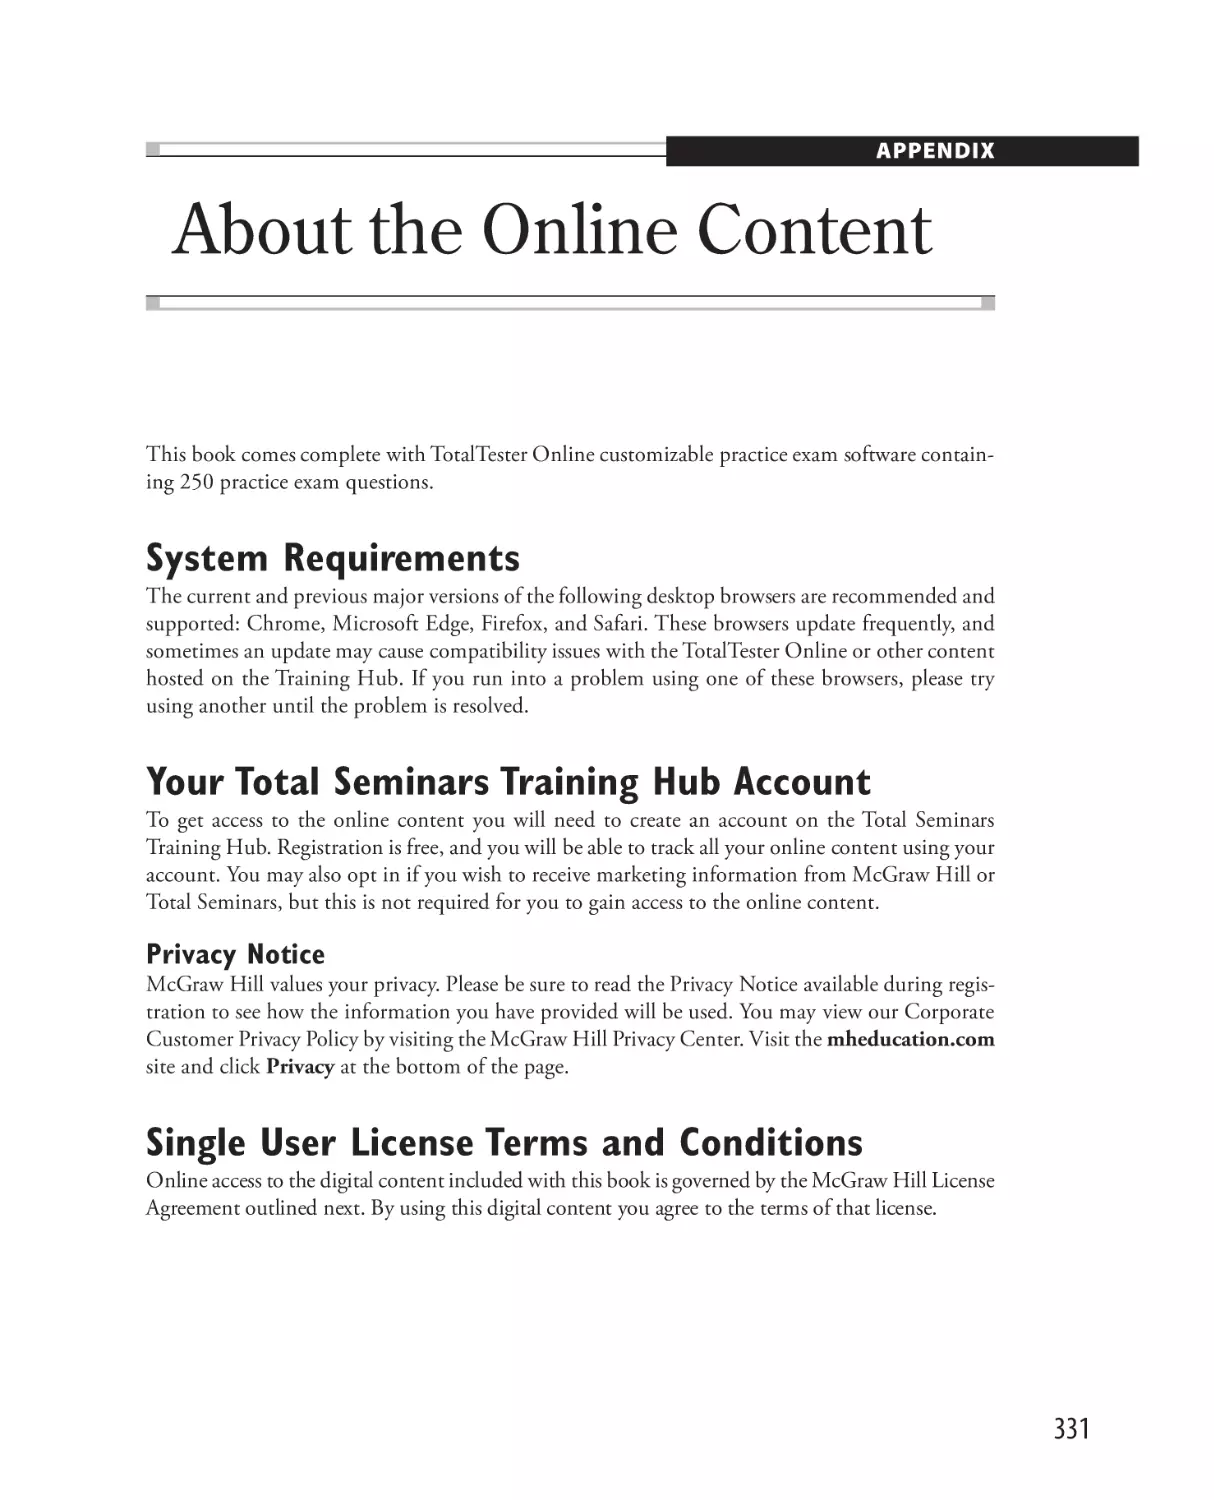 About the Online Content